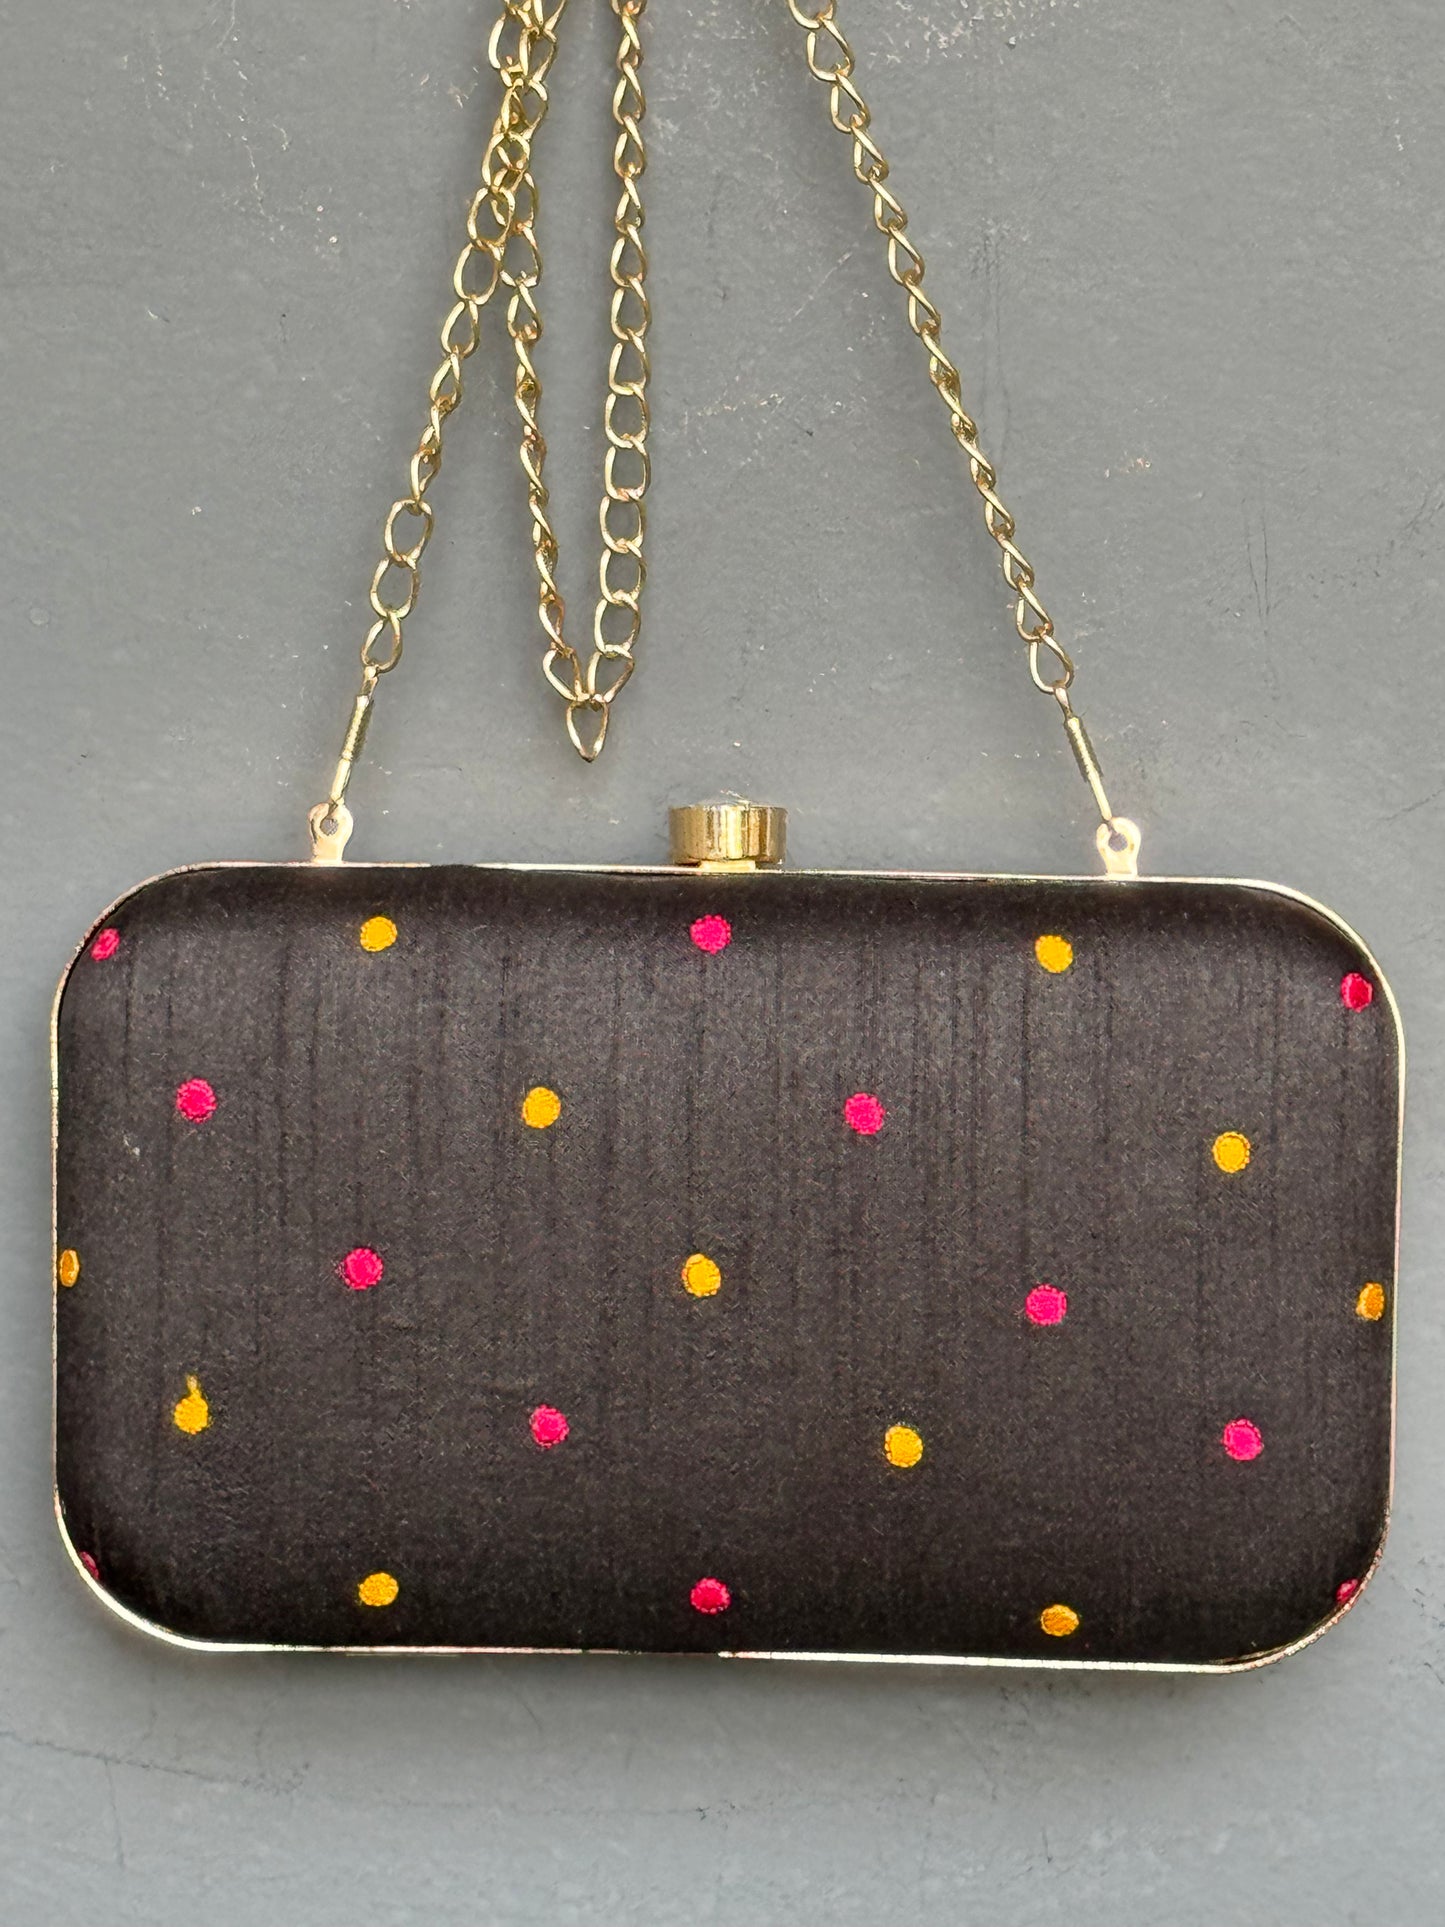 Black metallic box sling bag / clutch with multi coloured floral embroidery